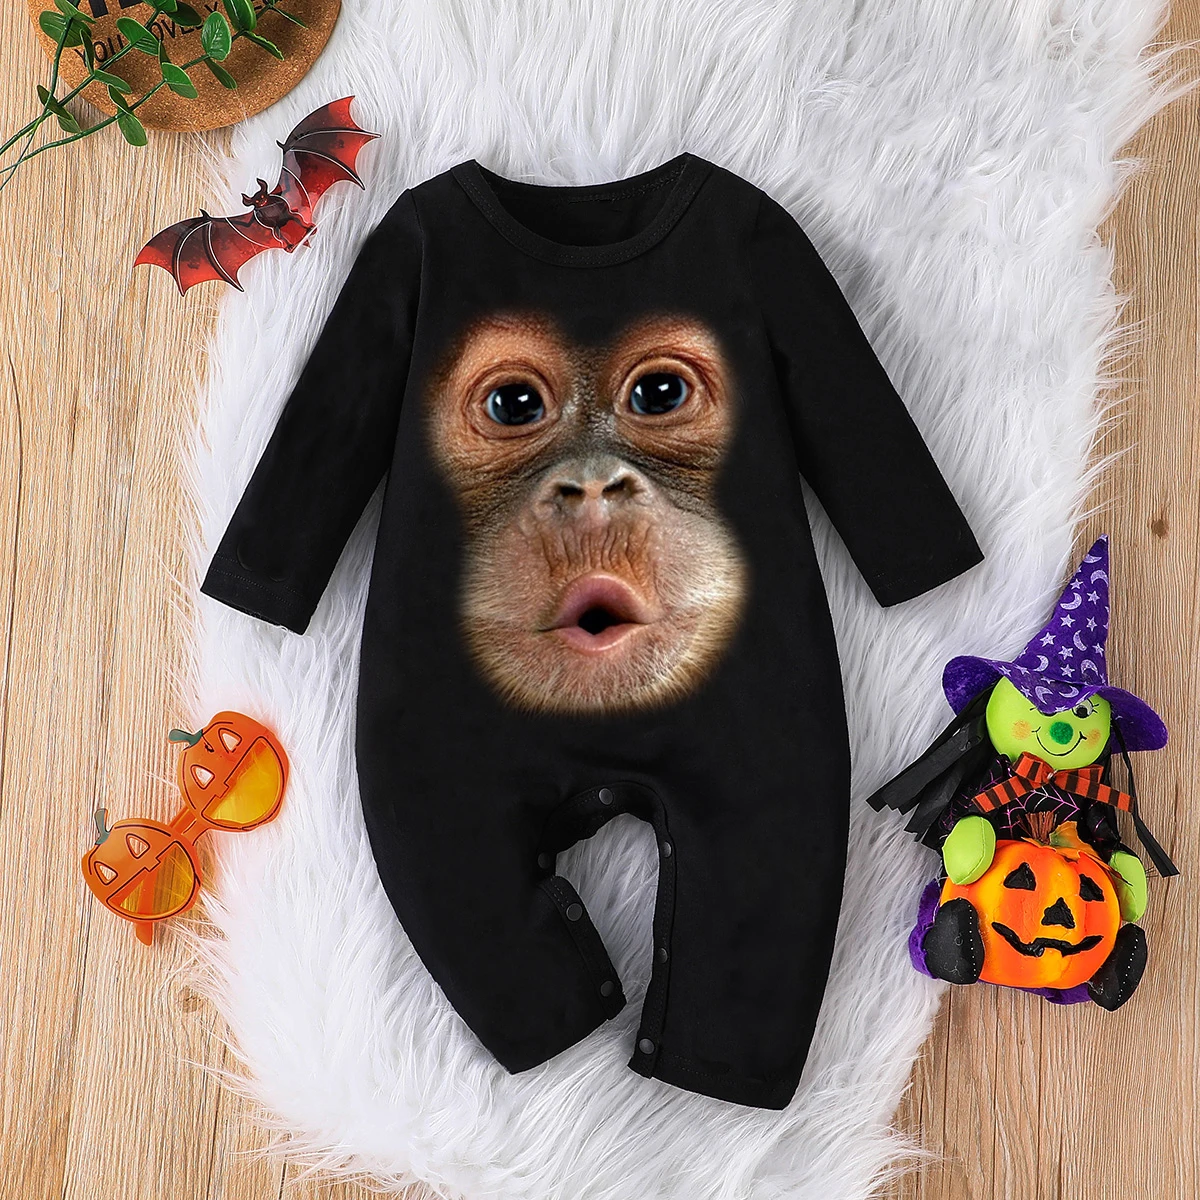 The Latest Funny T-shirt Monkey 0-24 Months Baby Boys Girls Romper Infant Jumpsuit Cartoon Sleeved Climbing Pajamas Cotton Brand